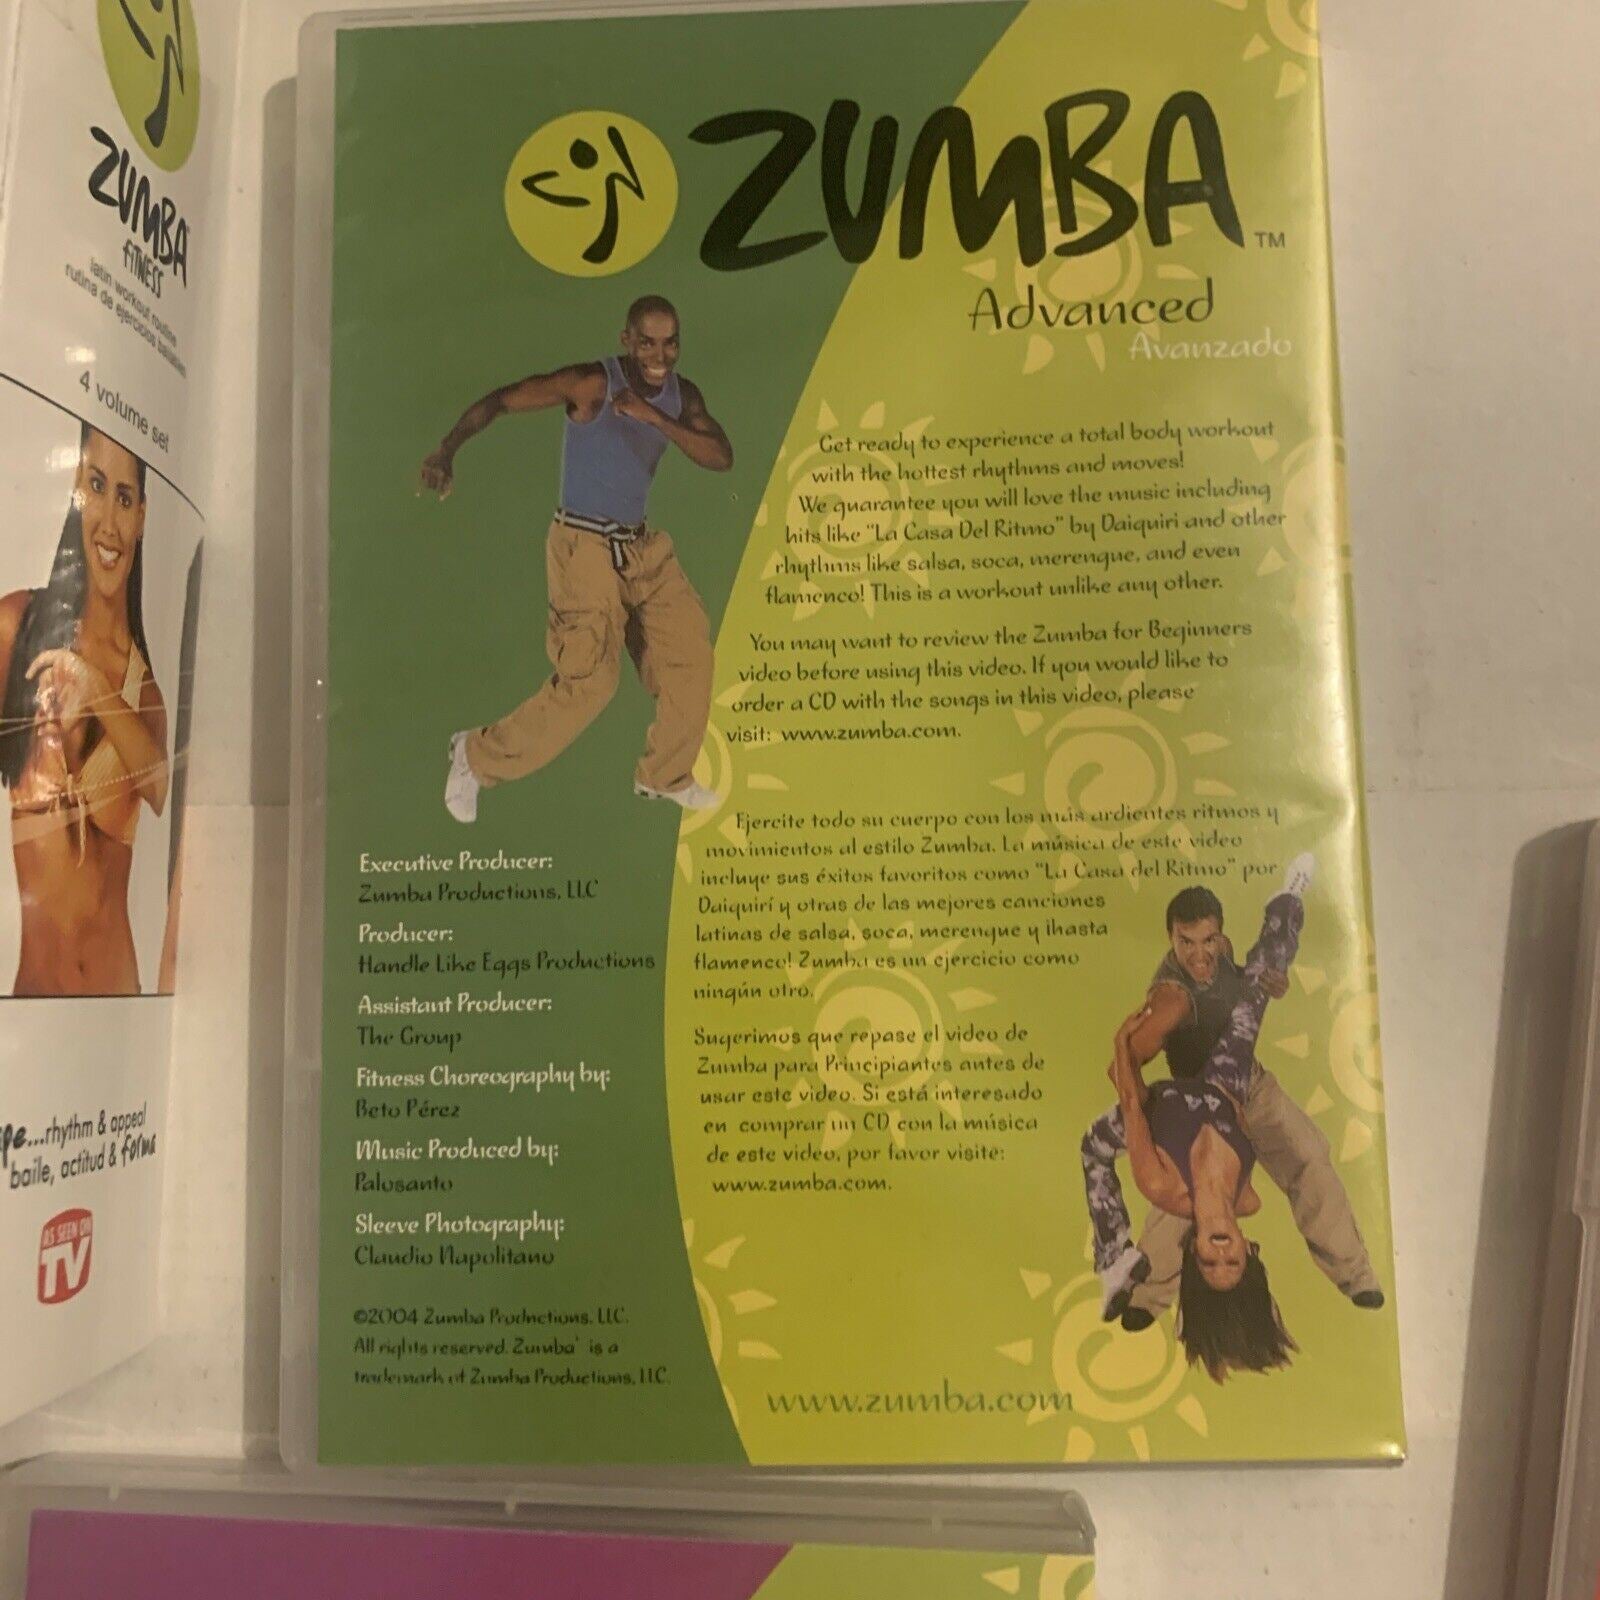 Zumba Fitness DVD 6 Workouts on 4 DVDs 2 Toning Sticks Boxed Set